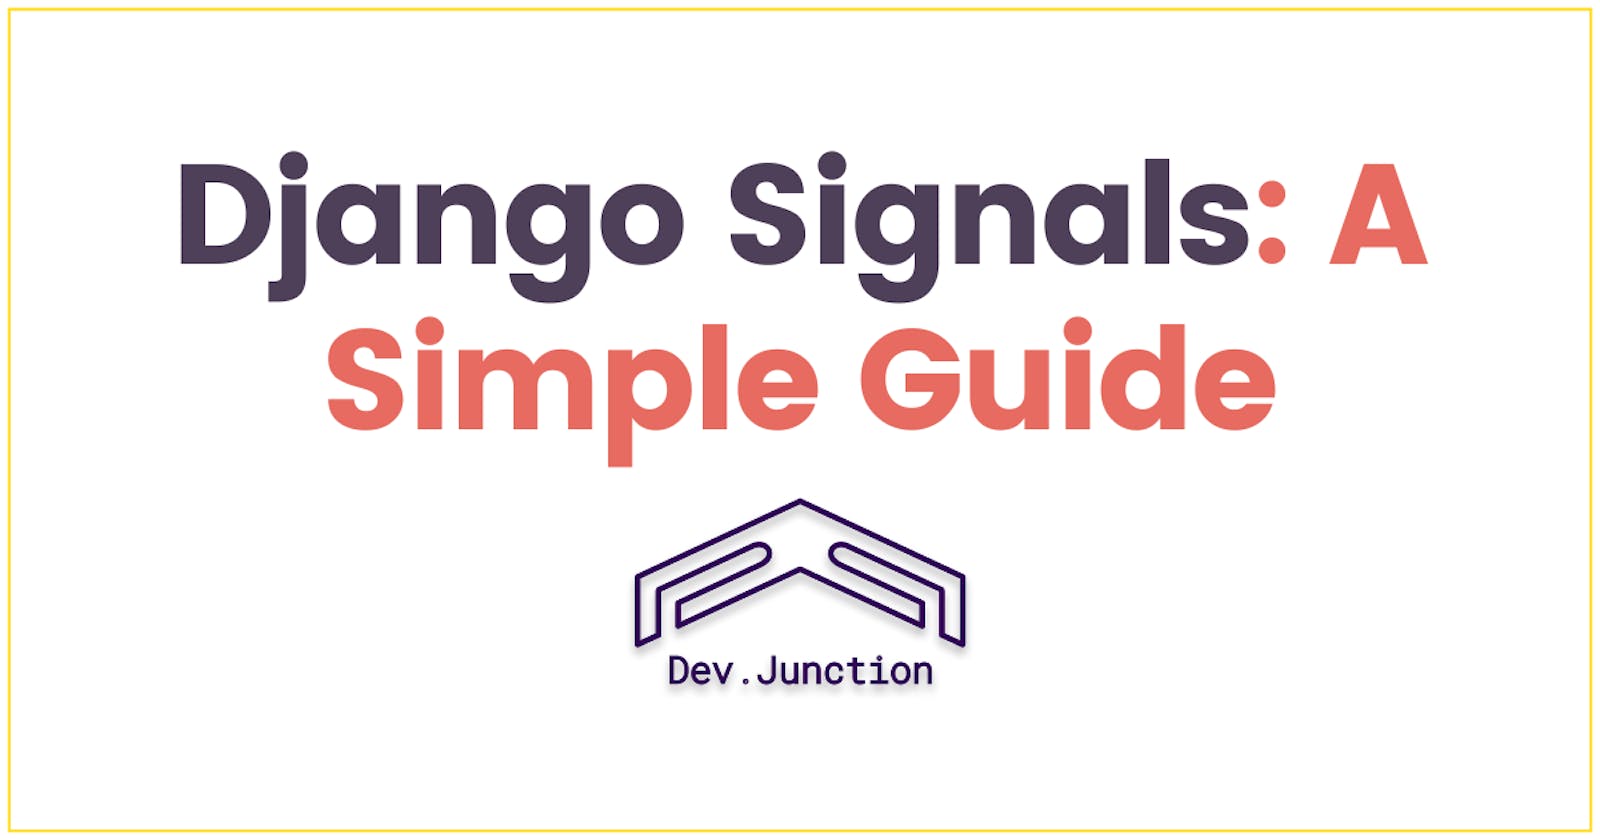 Introduction to Django Signals: A Simple Guide